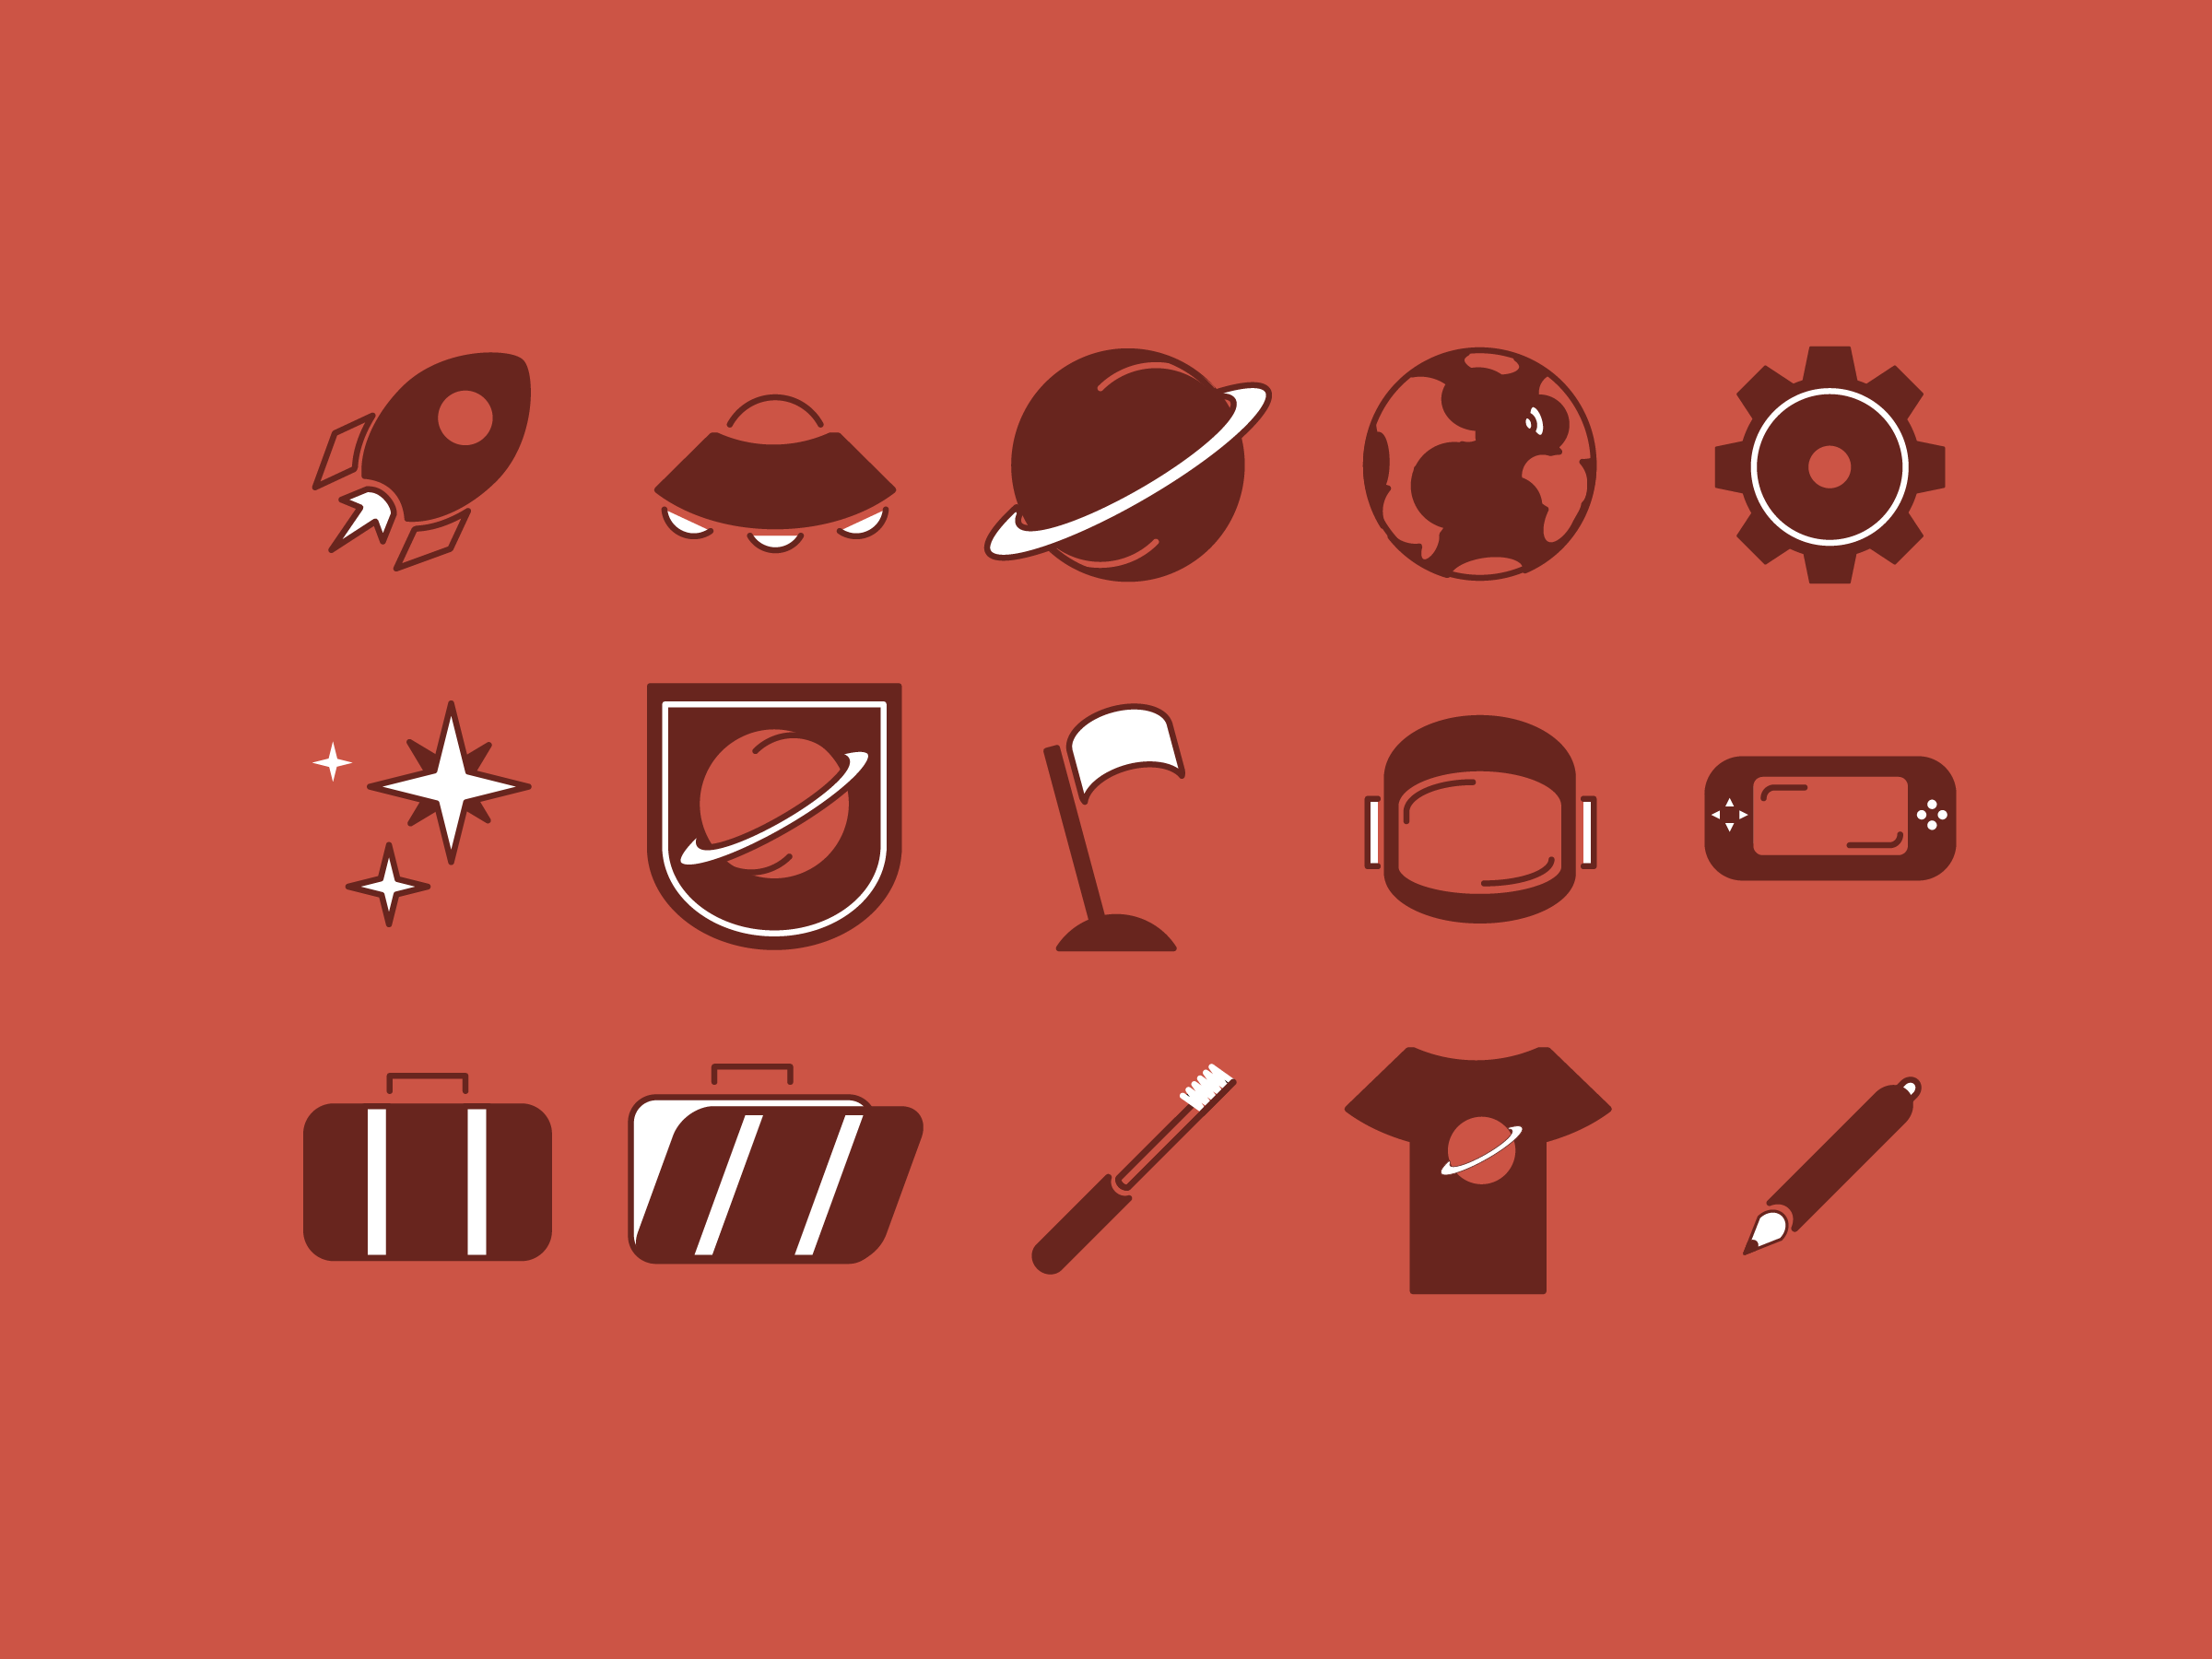 Space travel icons